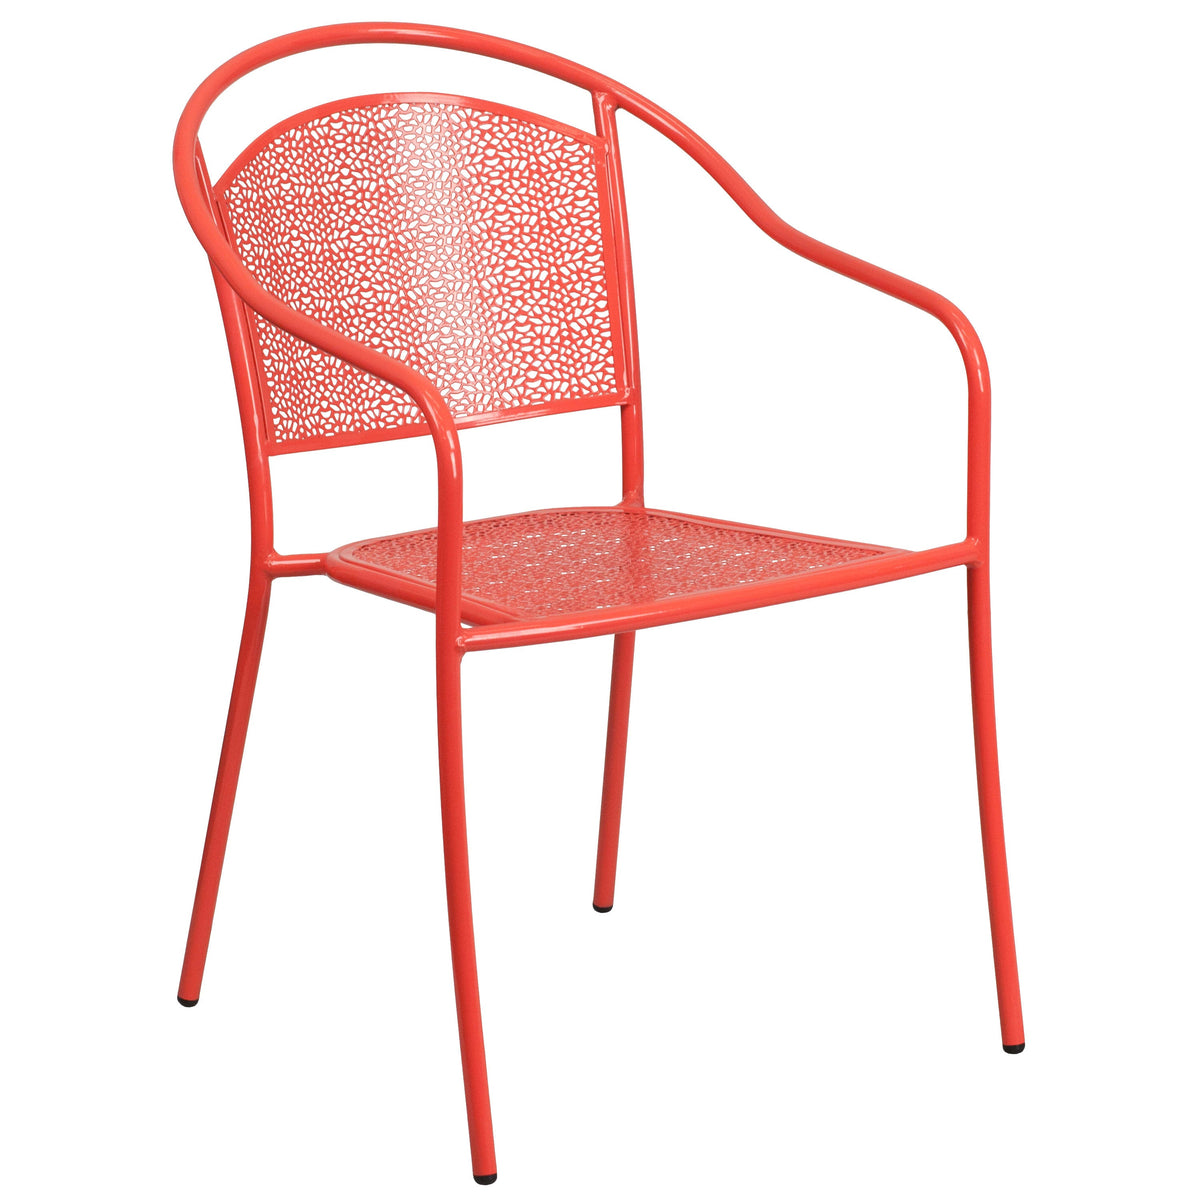 Coral |#| 35.5inch Square Coral Indoor-Outdoor Steel Patio Table Set w/ 4 Round Back Chairs